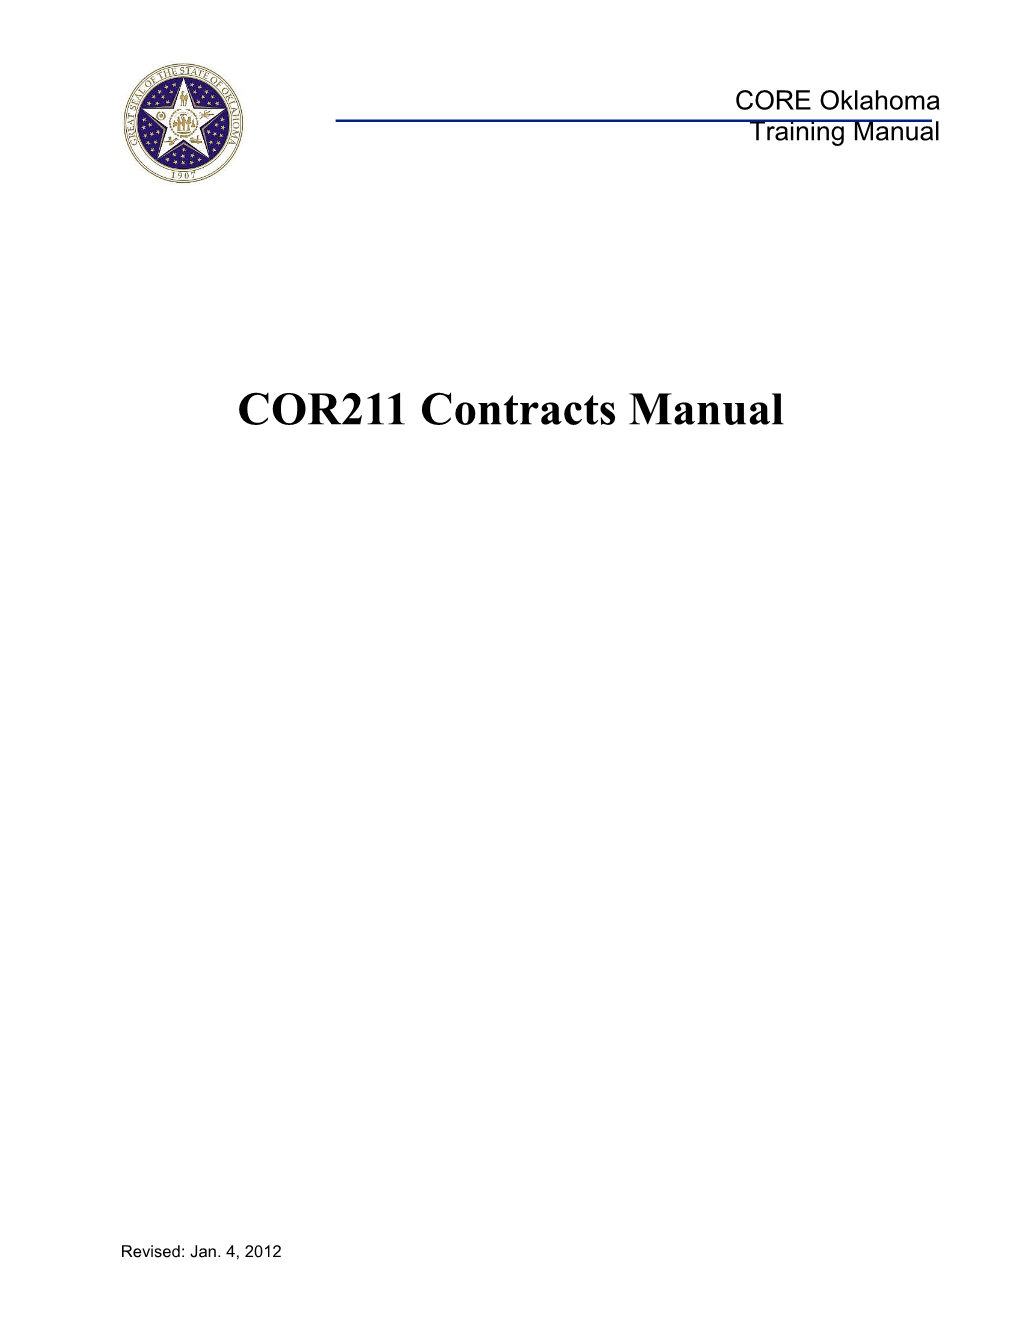 COR211 Contracts Manual